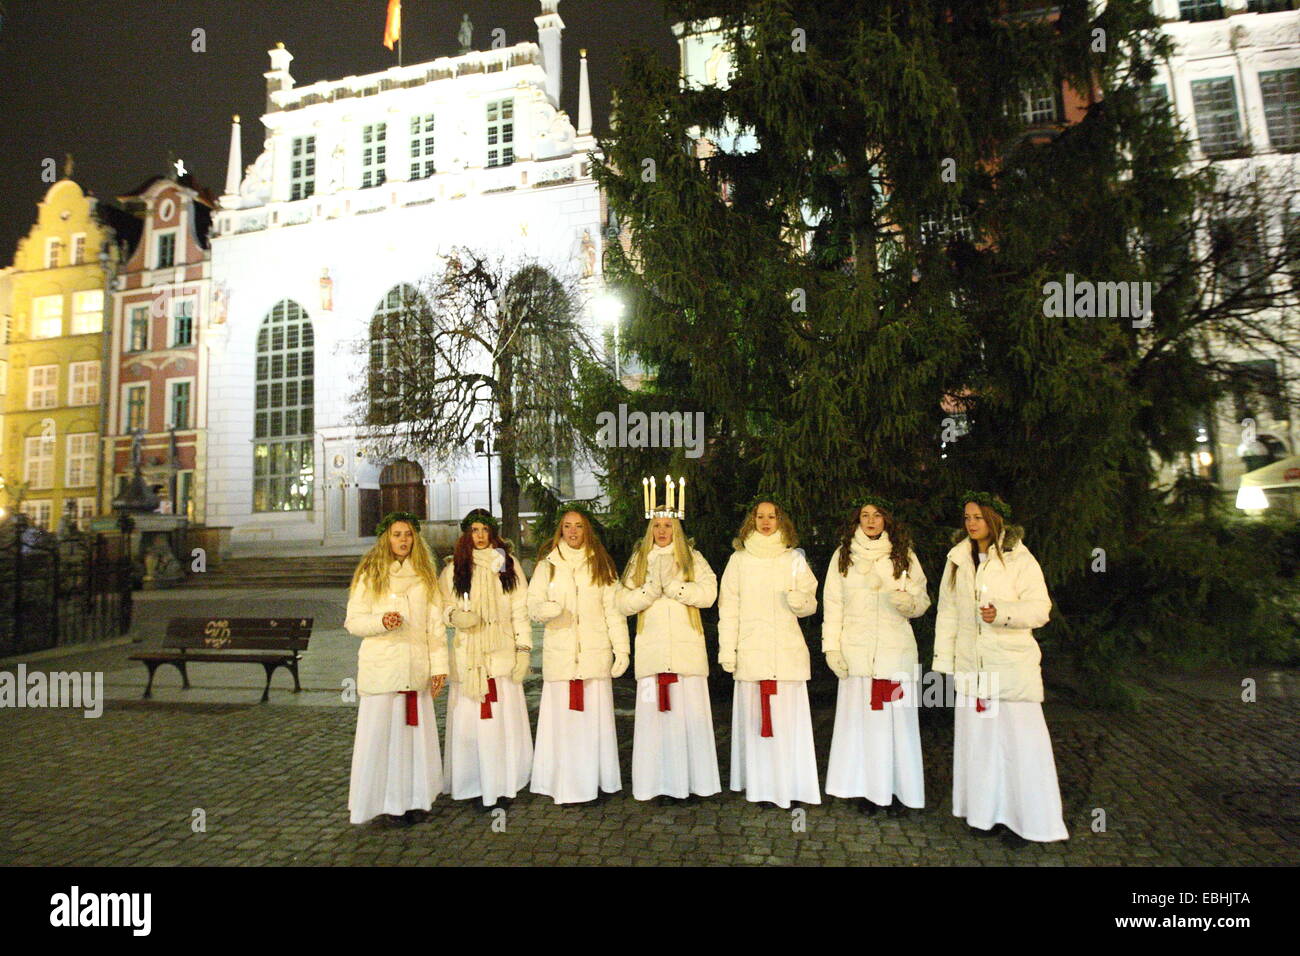 Gdansk, Poland 1st, Dec. 2014 Young girls from Kalmar, Sweden dressed in a white dress and a red sash (as the symbol of martyrdom) carries candles in proccesion along the Gdansk Old City centre. One of them (Stina Mattisson) wears a crown of candles on her head. Girls dressed as Lucy carry cookies in procession and sing a songs. It is said that to vividly celebrate St. Lucy's Day will help one live the long winter days with enough light. Credit:  Michal Fludra/Alamy Live News Stock Photo